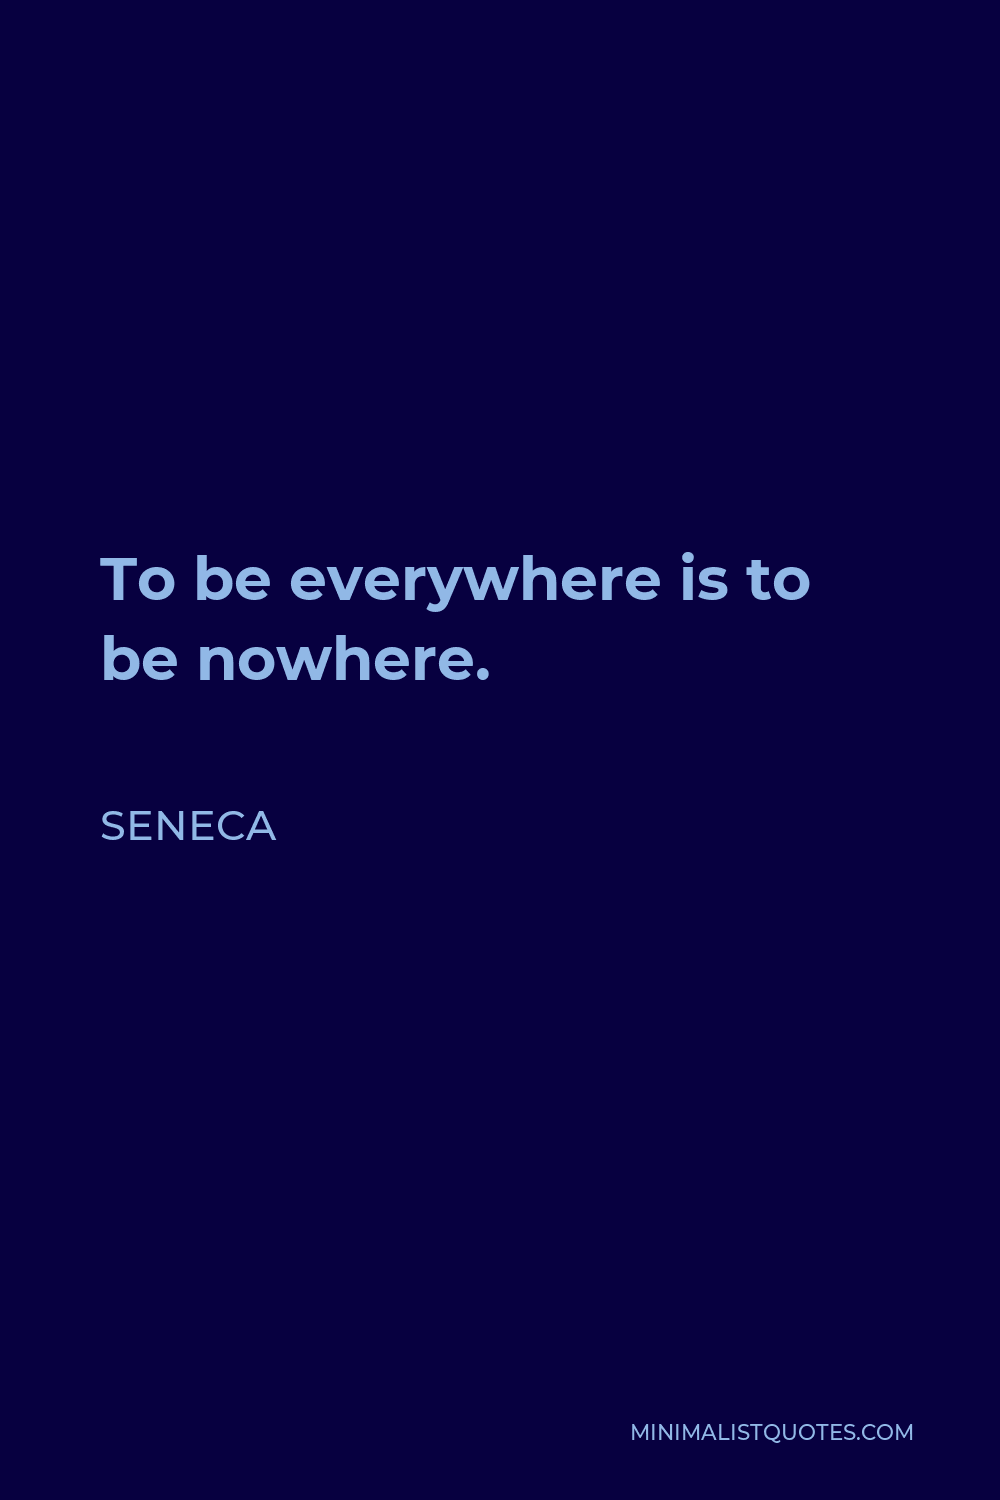 Seneca Quote - To be everywhere is to be nowhere.